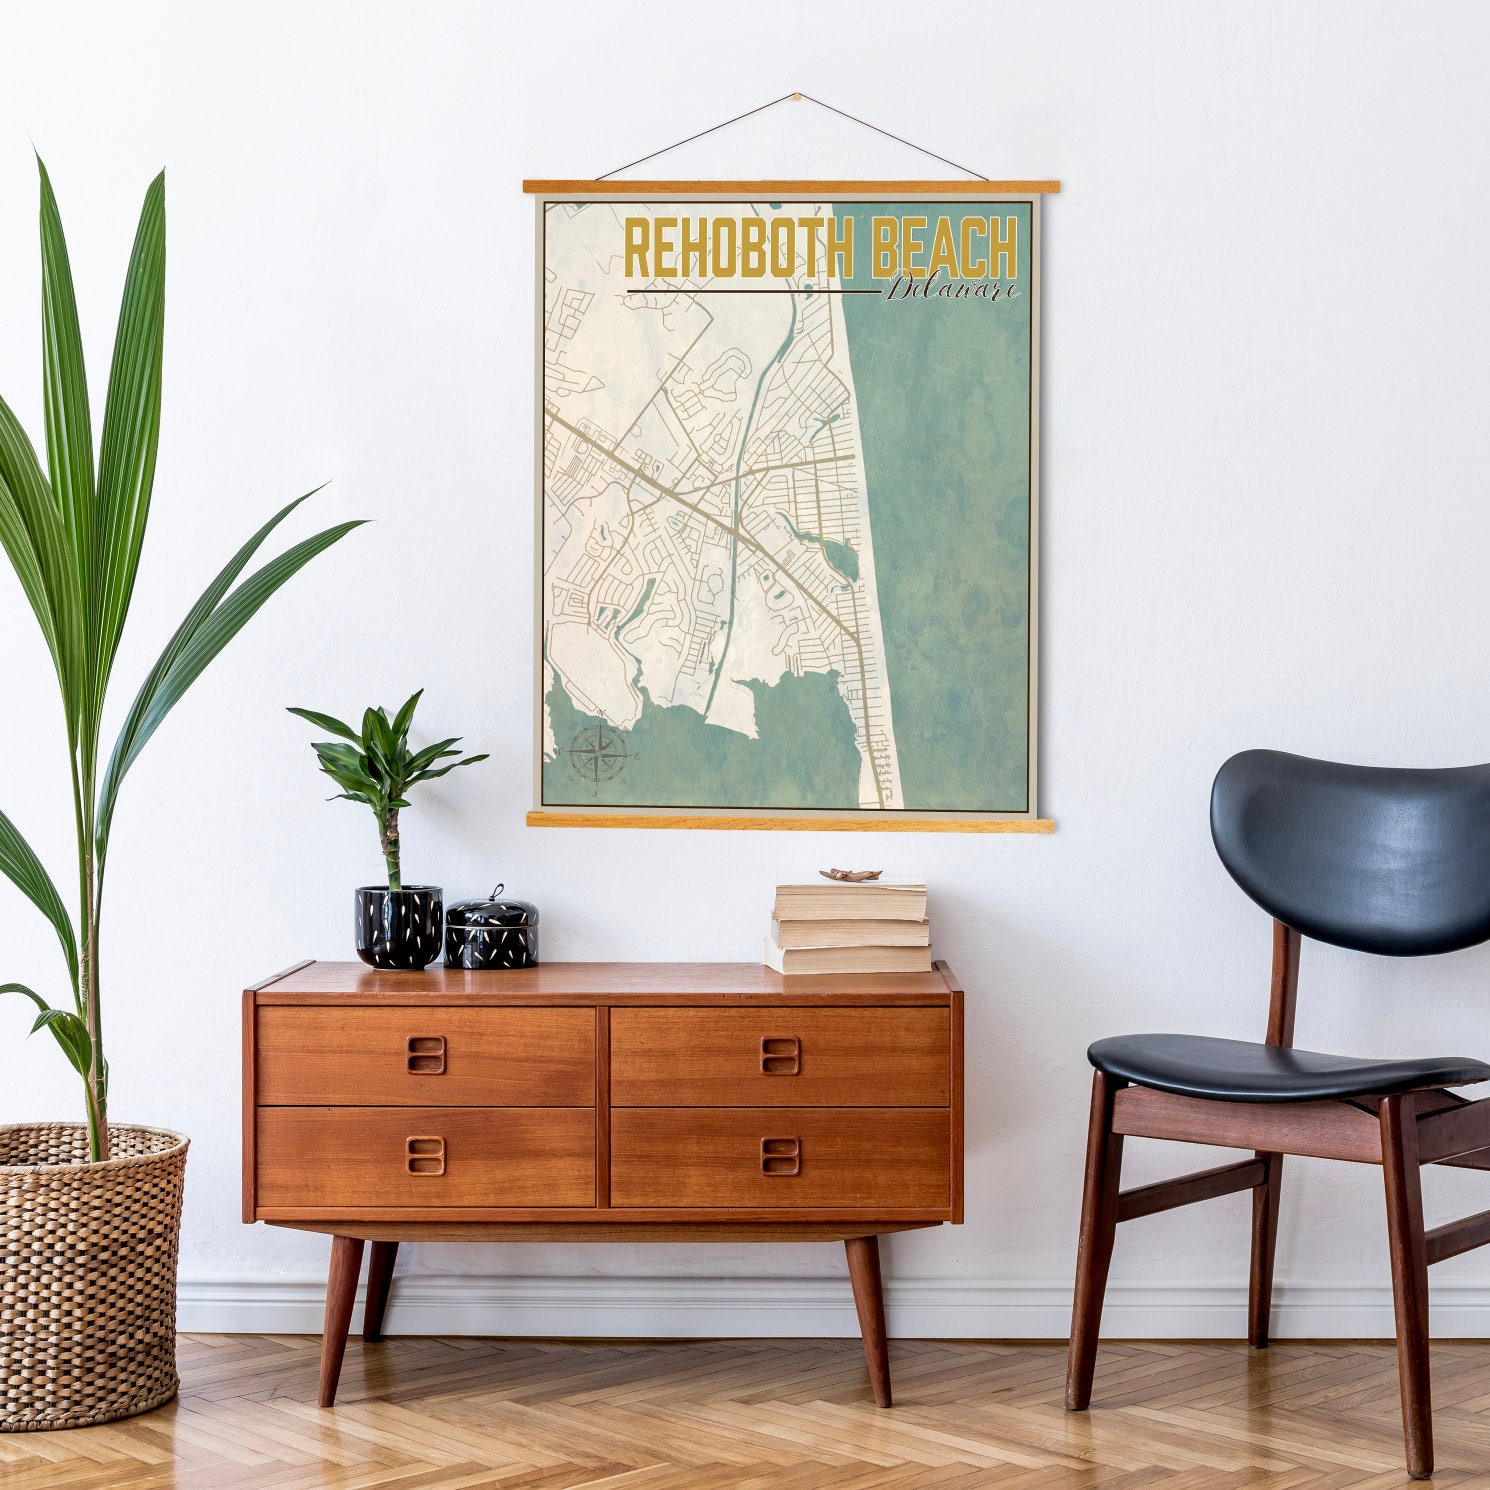 Rehoboth Beach Delaware Street Map | Hanging Poster Of Printed Marketplace